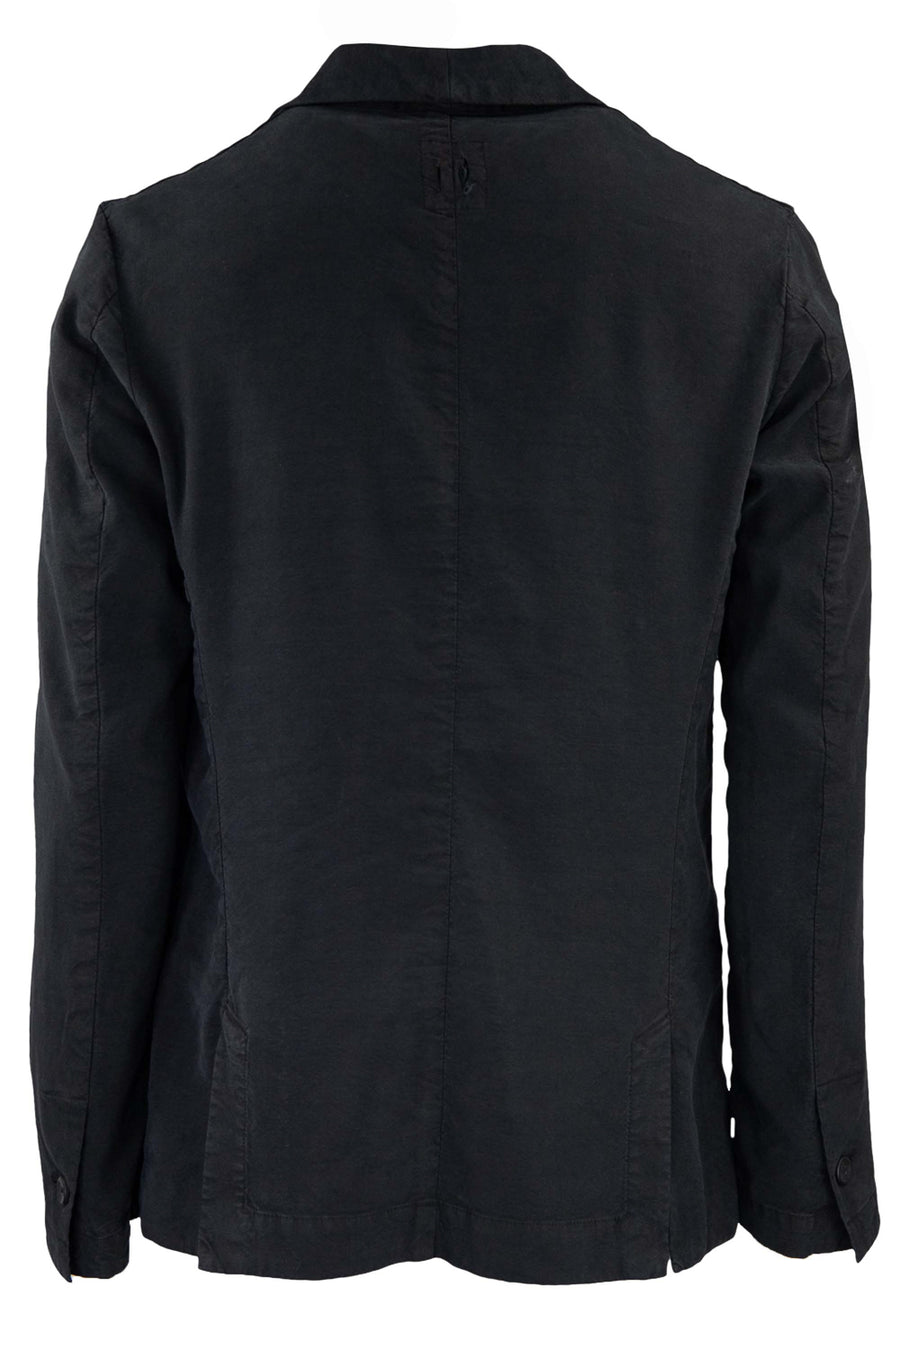 Buy the Hannes Roether Linen/Silk Blazer in Black at Intro. Spend £50 for free UK delivery. Official stockists. We ship worldwide.